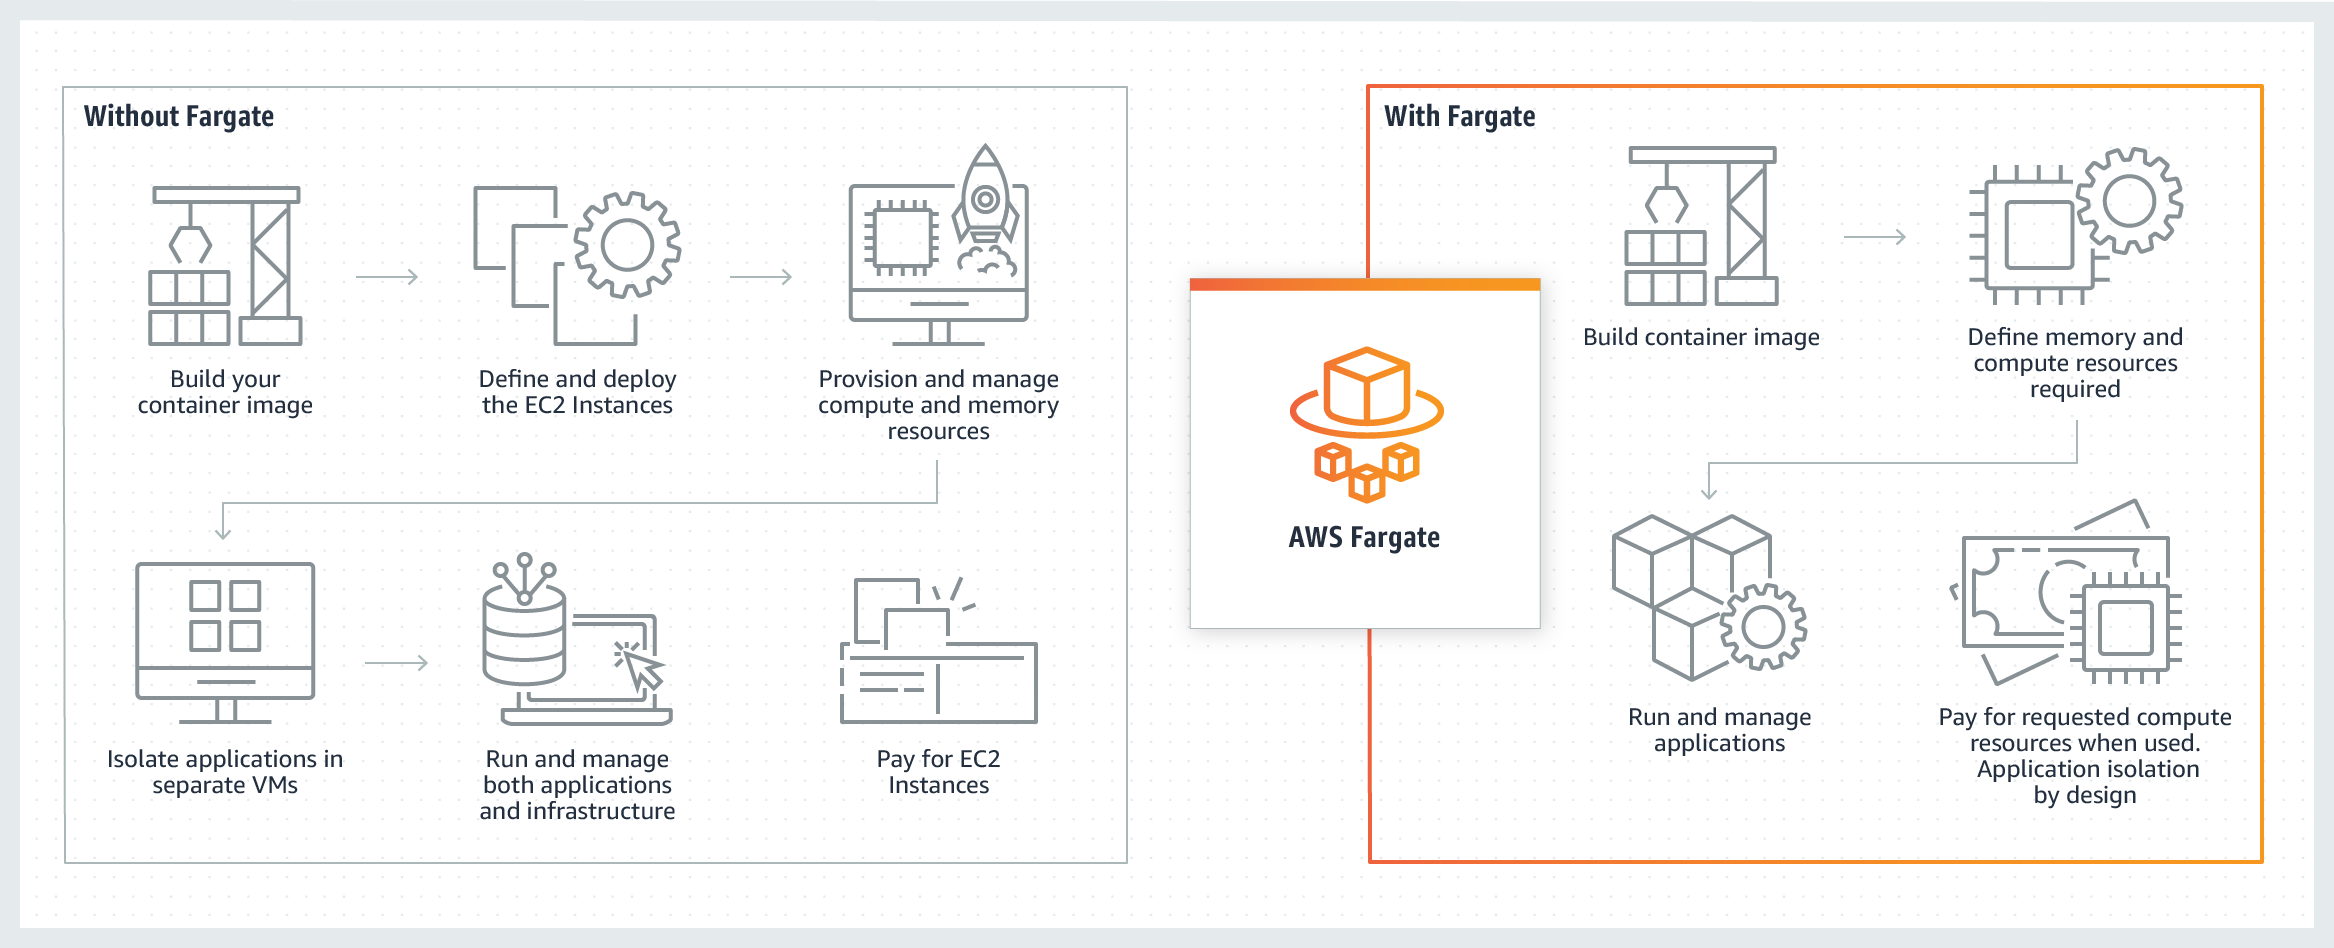 Image of AWS Fargate process diagram, showing how serverless functions in the AWS cloud. featured Image